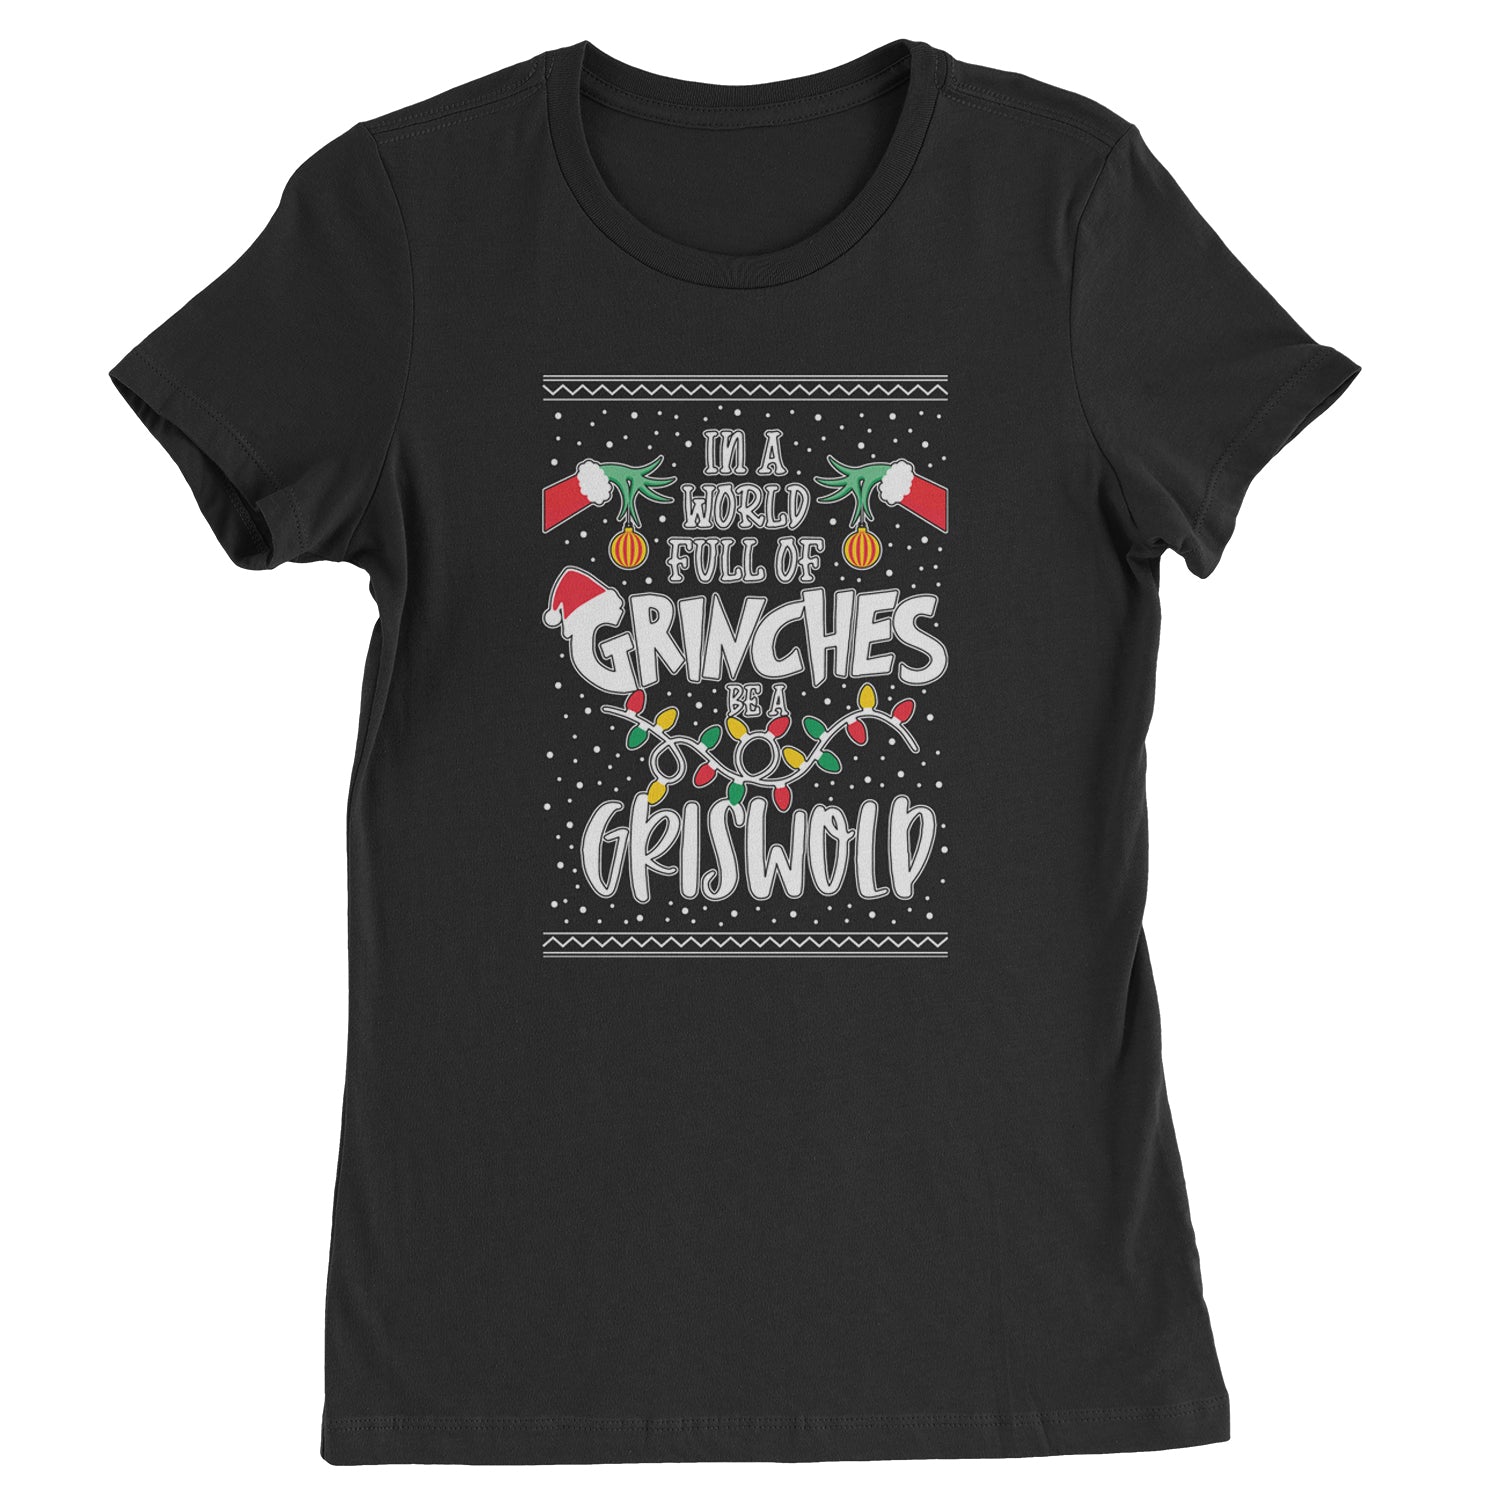 In A World Full Of Grinches, Be A Griswold Womens T-shirt clark, griswold, lampoon, margot by Expression Tees